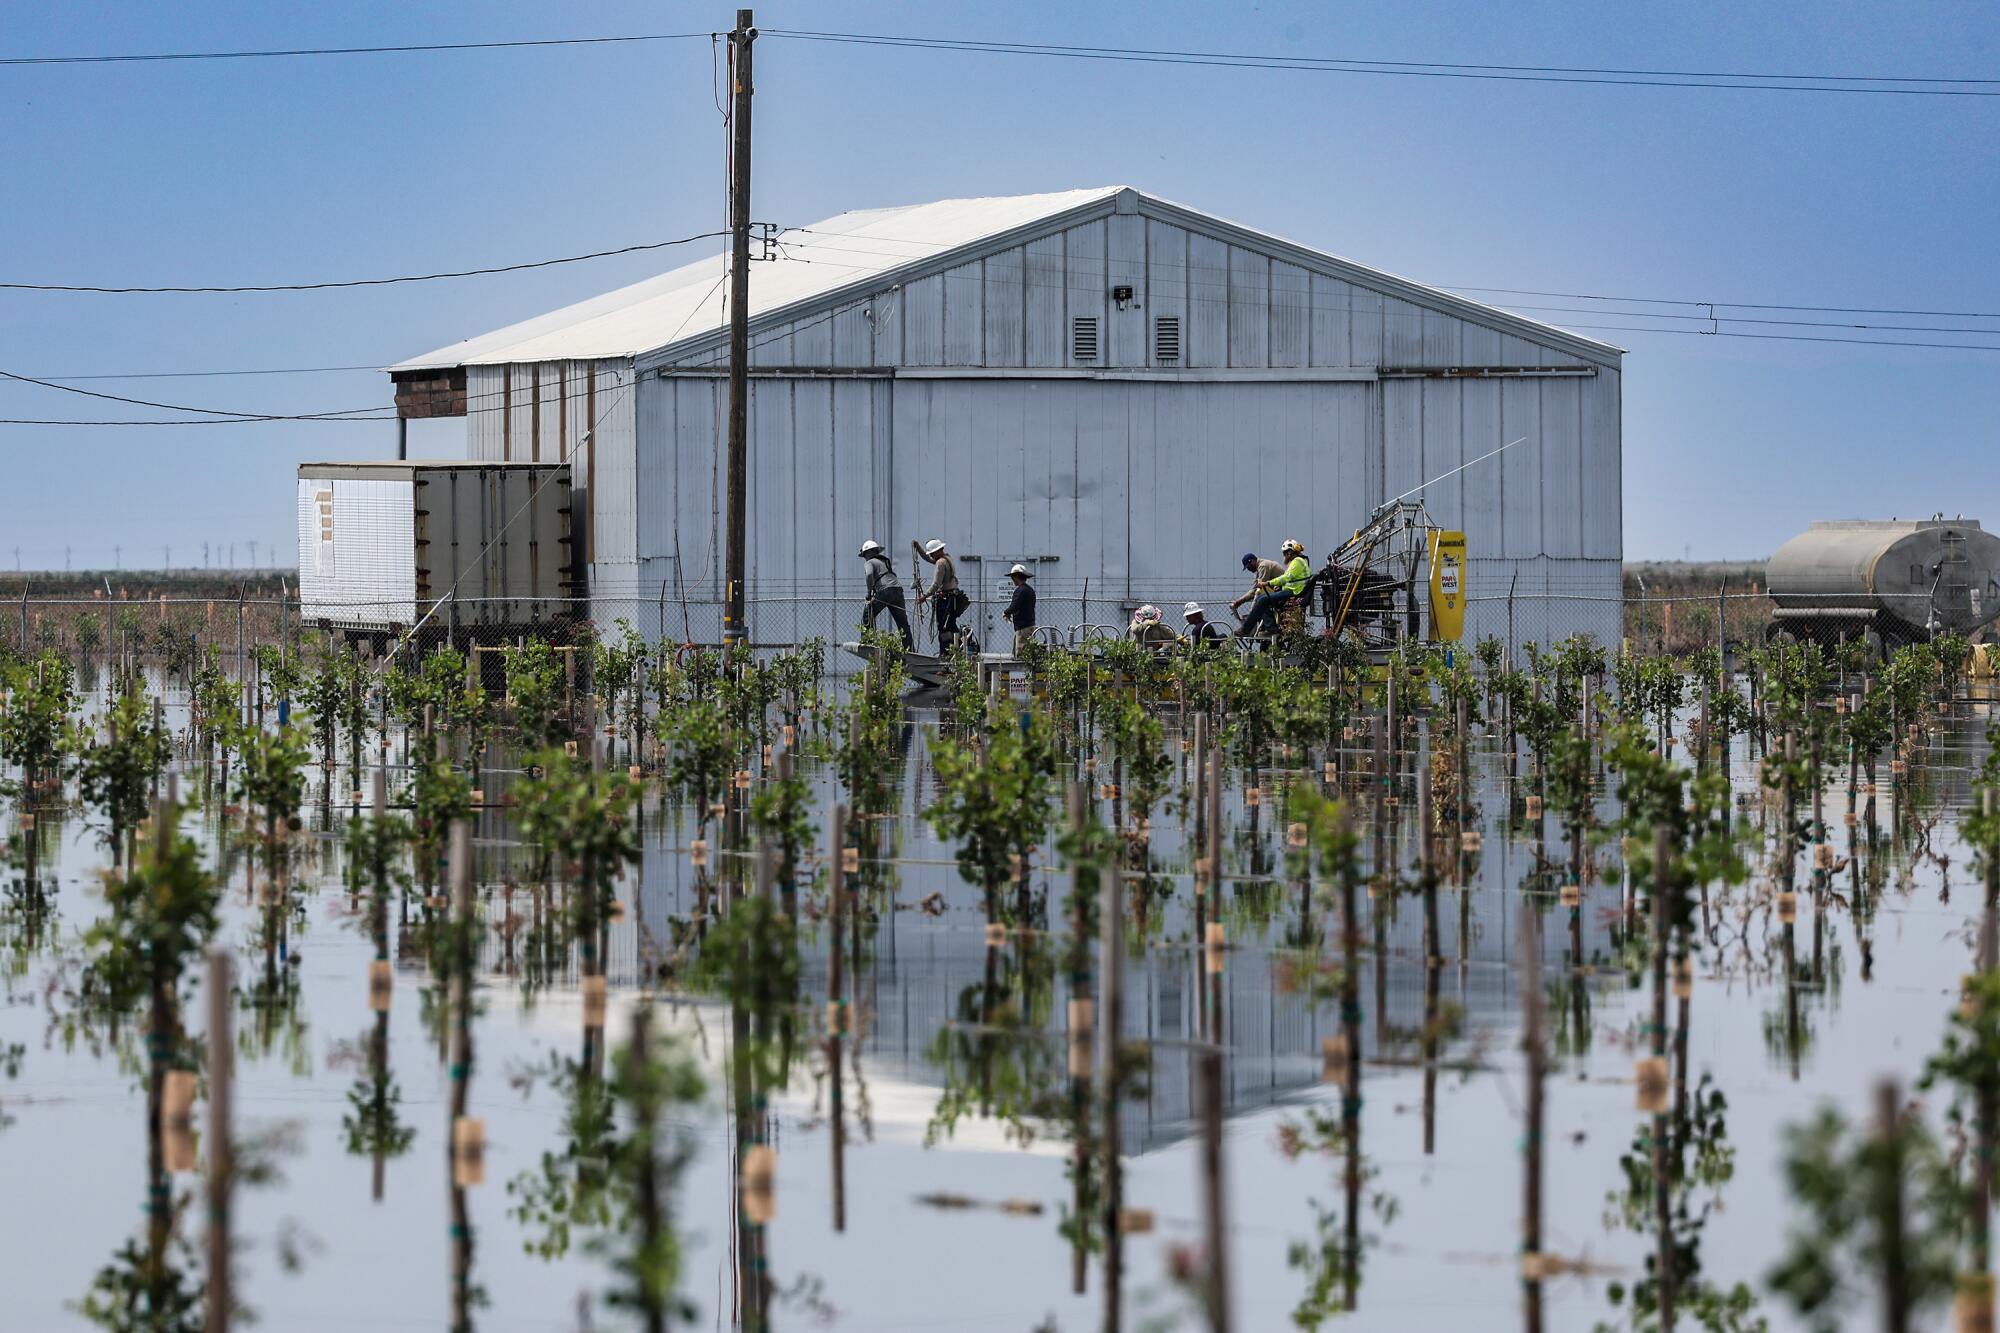 People work near a building amid floodwaters that have filled an orchard.